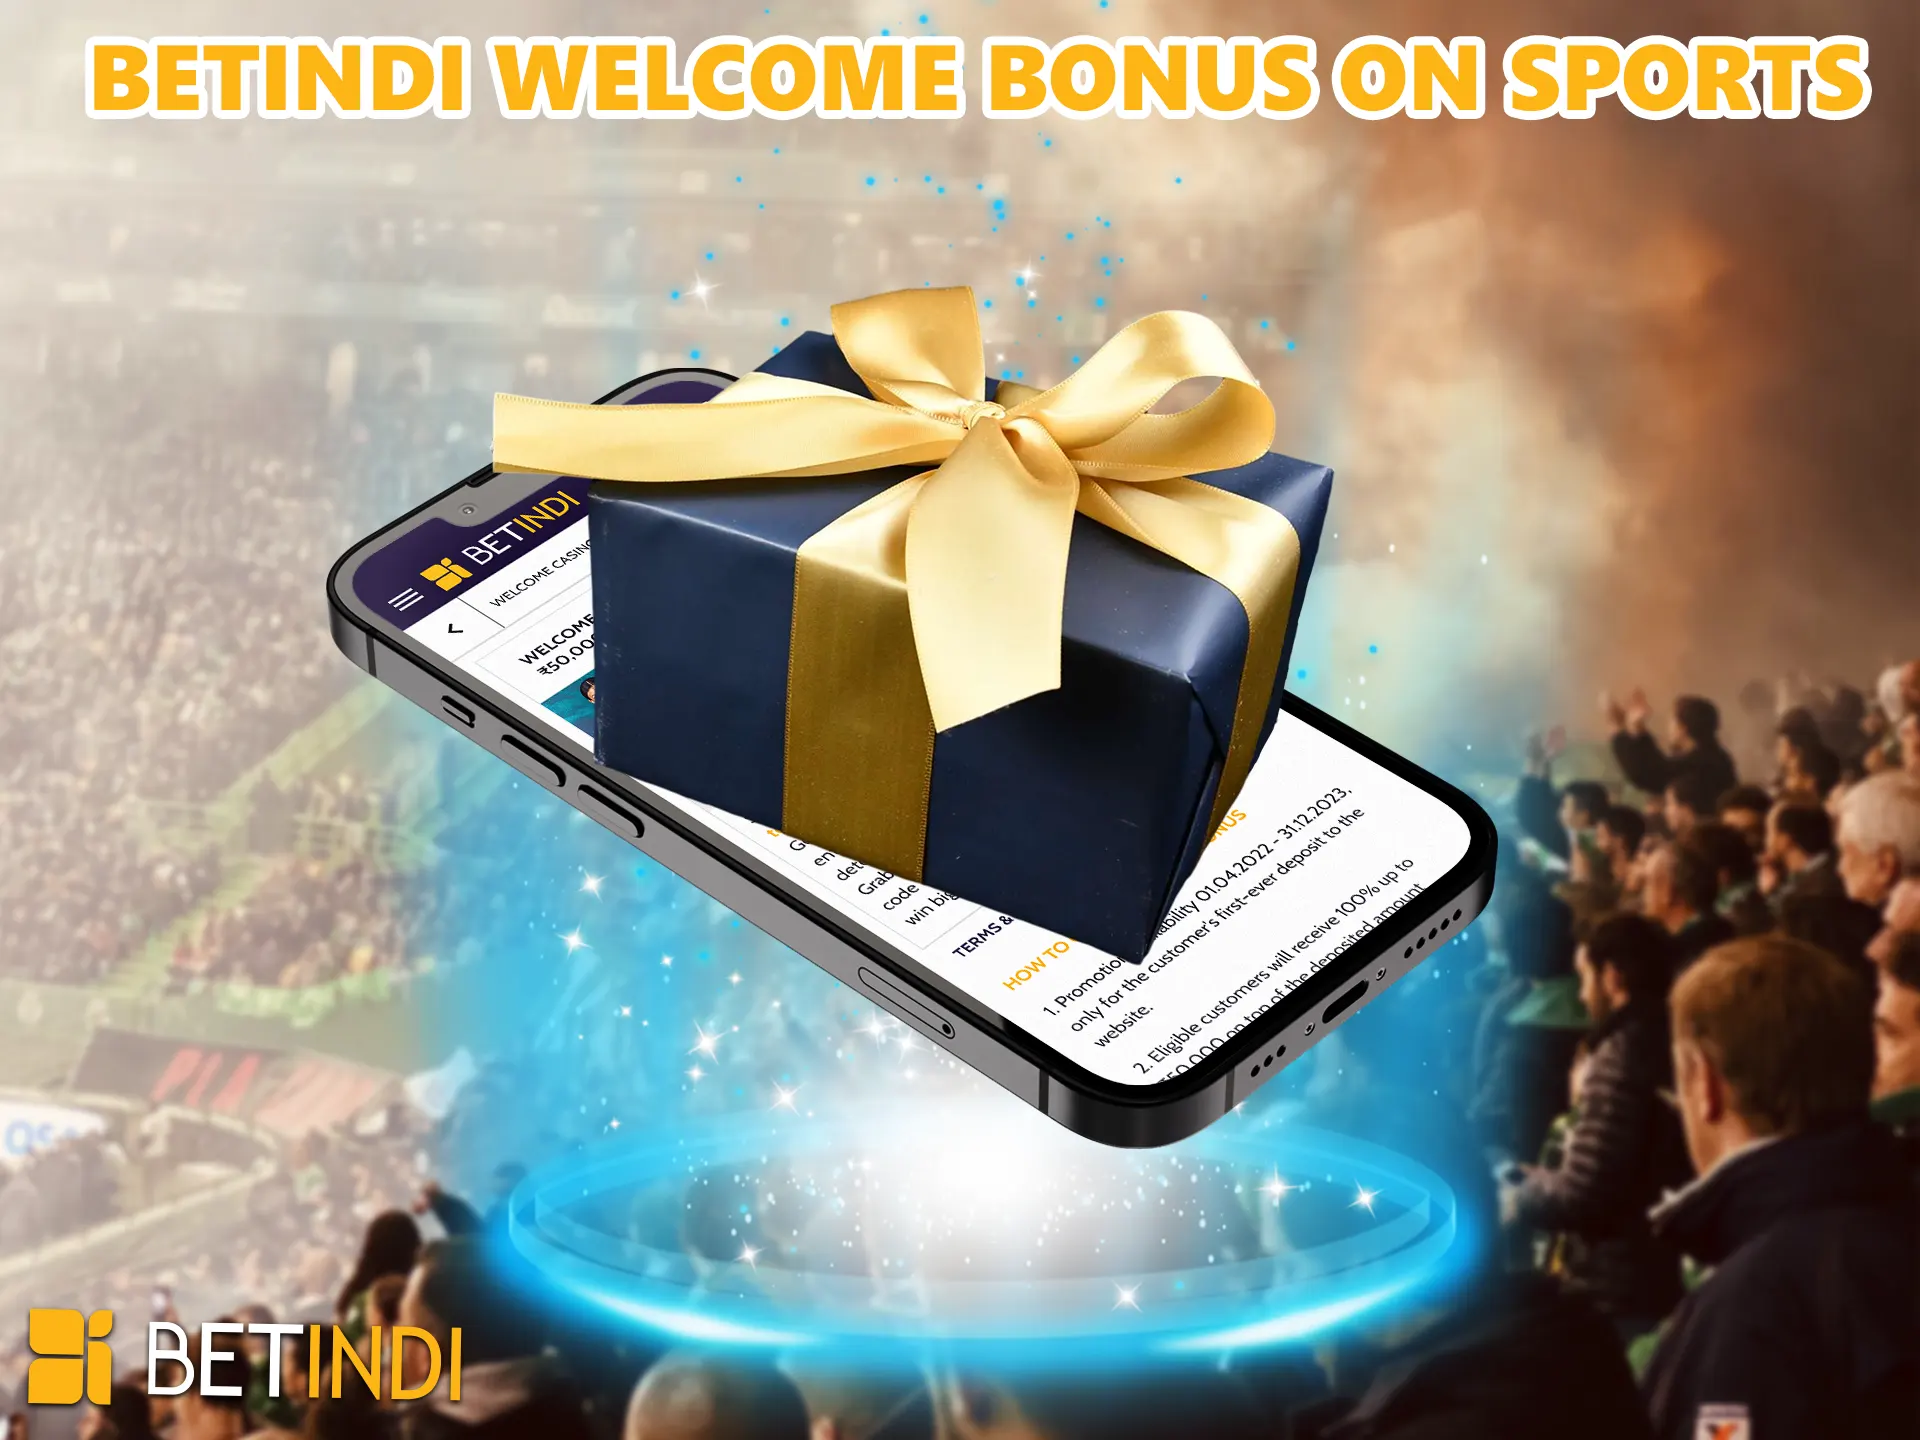 This bonus is available to new users, in our BetIndi India review section you will learn how to get it.